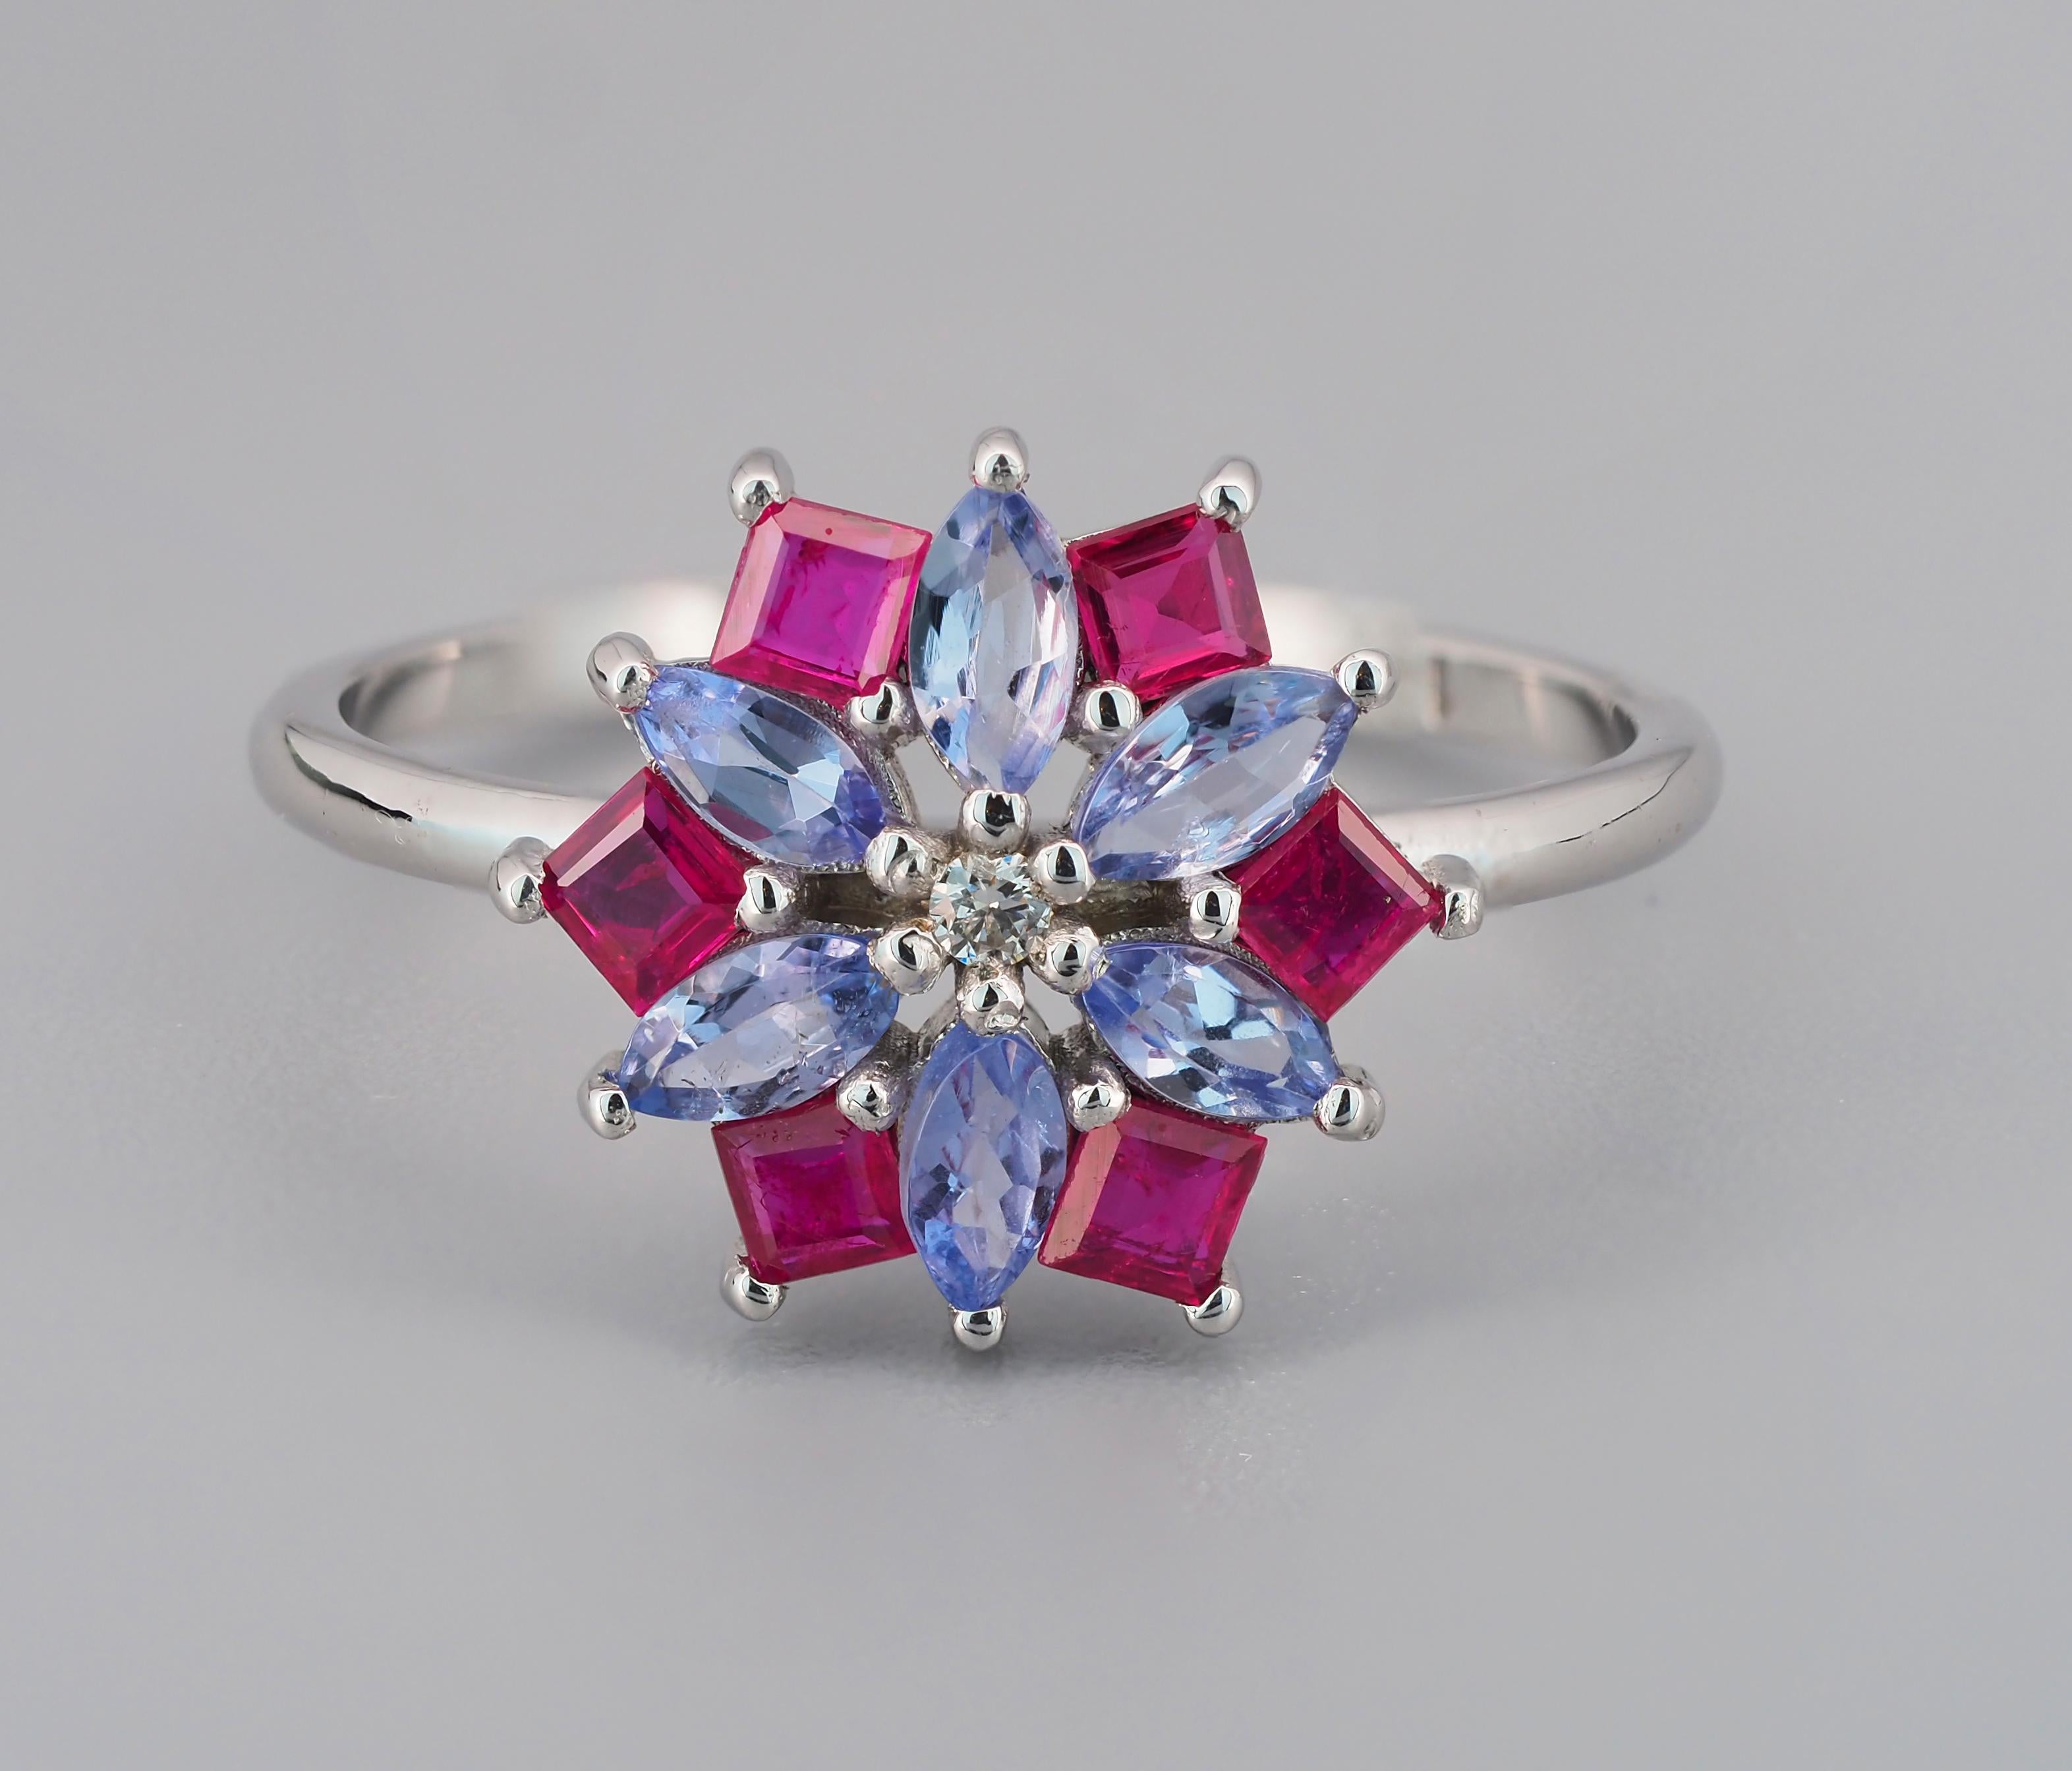 Ruby and tanzanite 14k gold ring. 
Flower gold ring with tanzanites. Elegant gold ring with tanzanites, rubies. Colorfull ring. Elegant ring.

Metal:14k gold
Weight: 2.2 g. depends from size.

Central stones: Tanzanites
Cut: Marquise
Weight: aprx